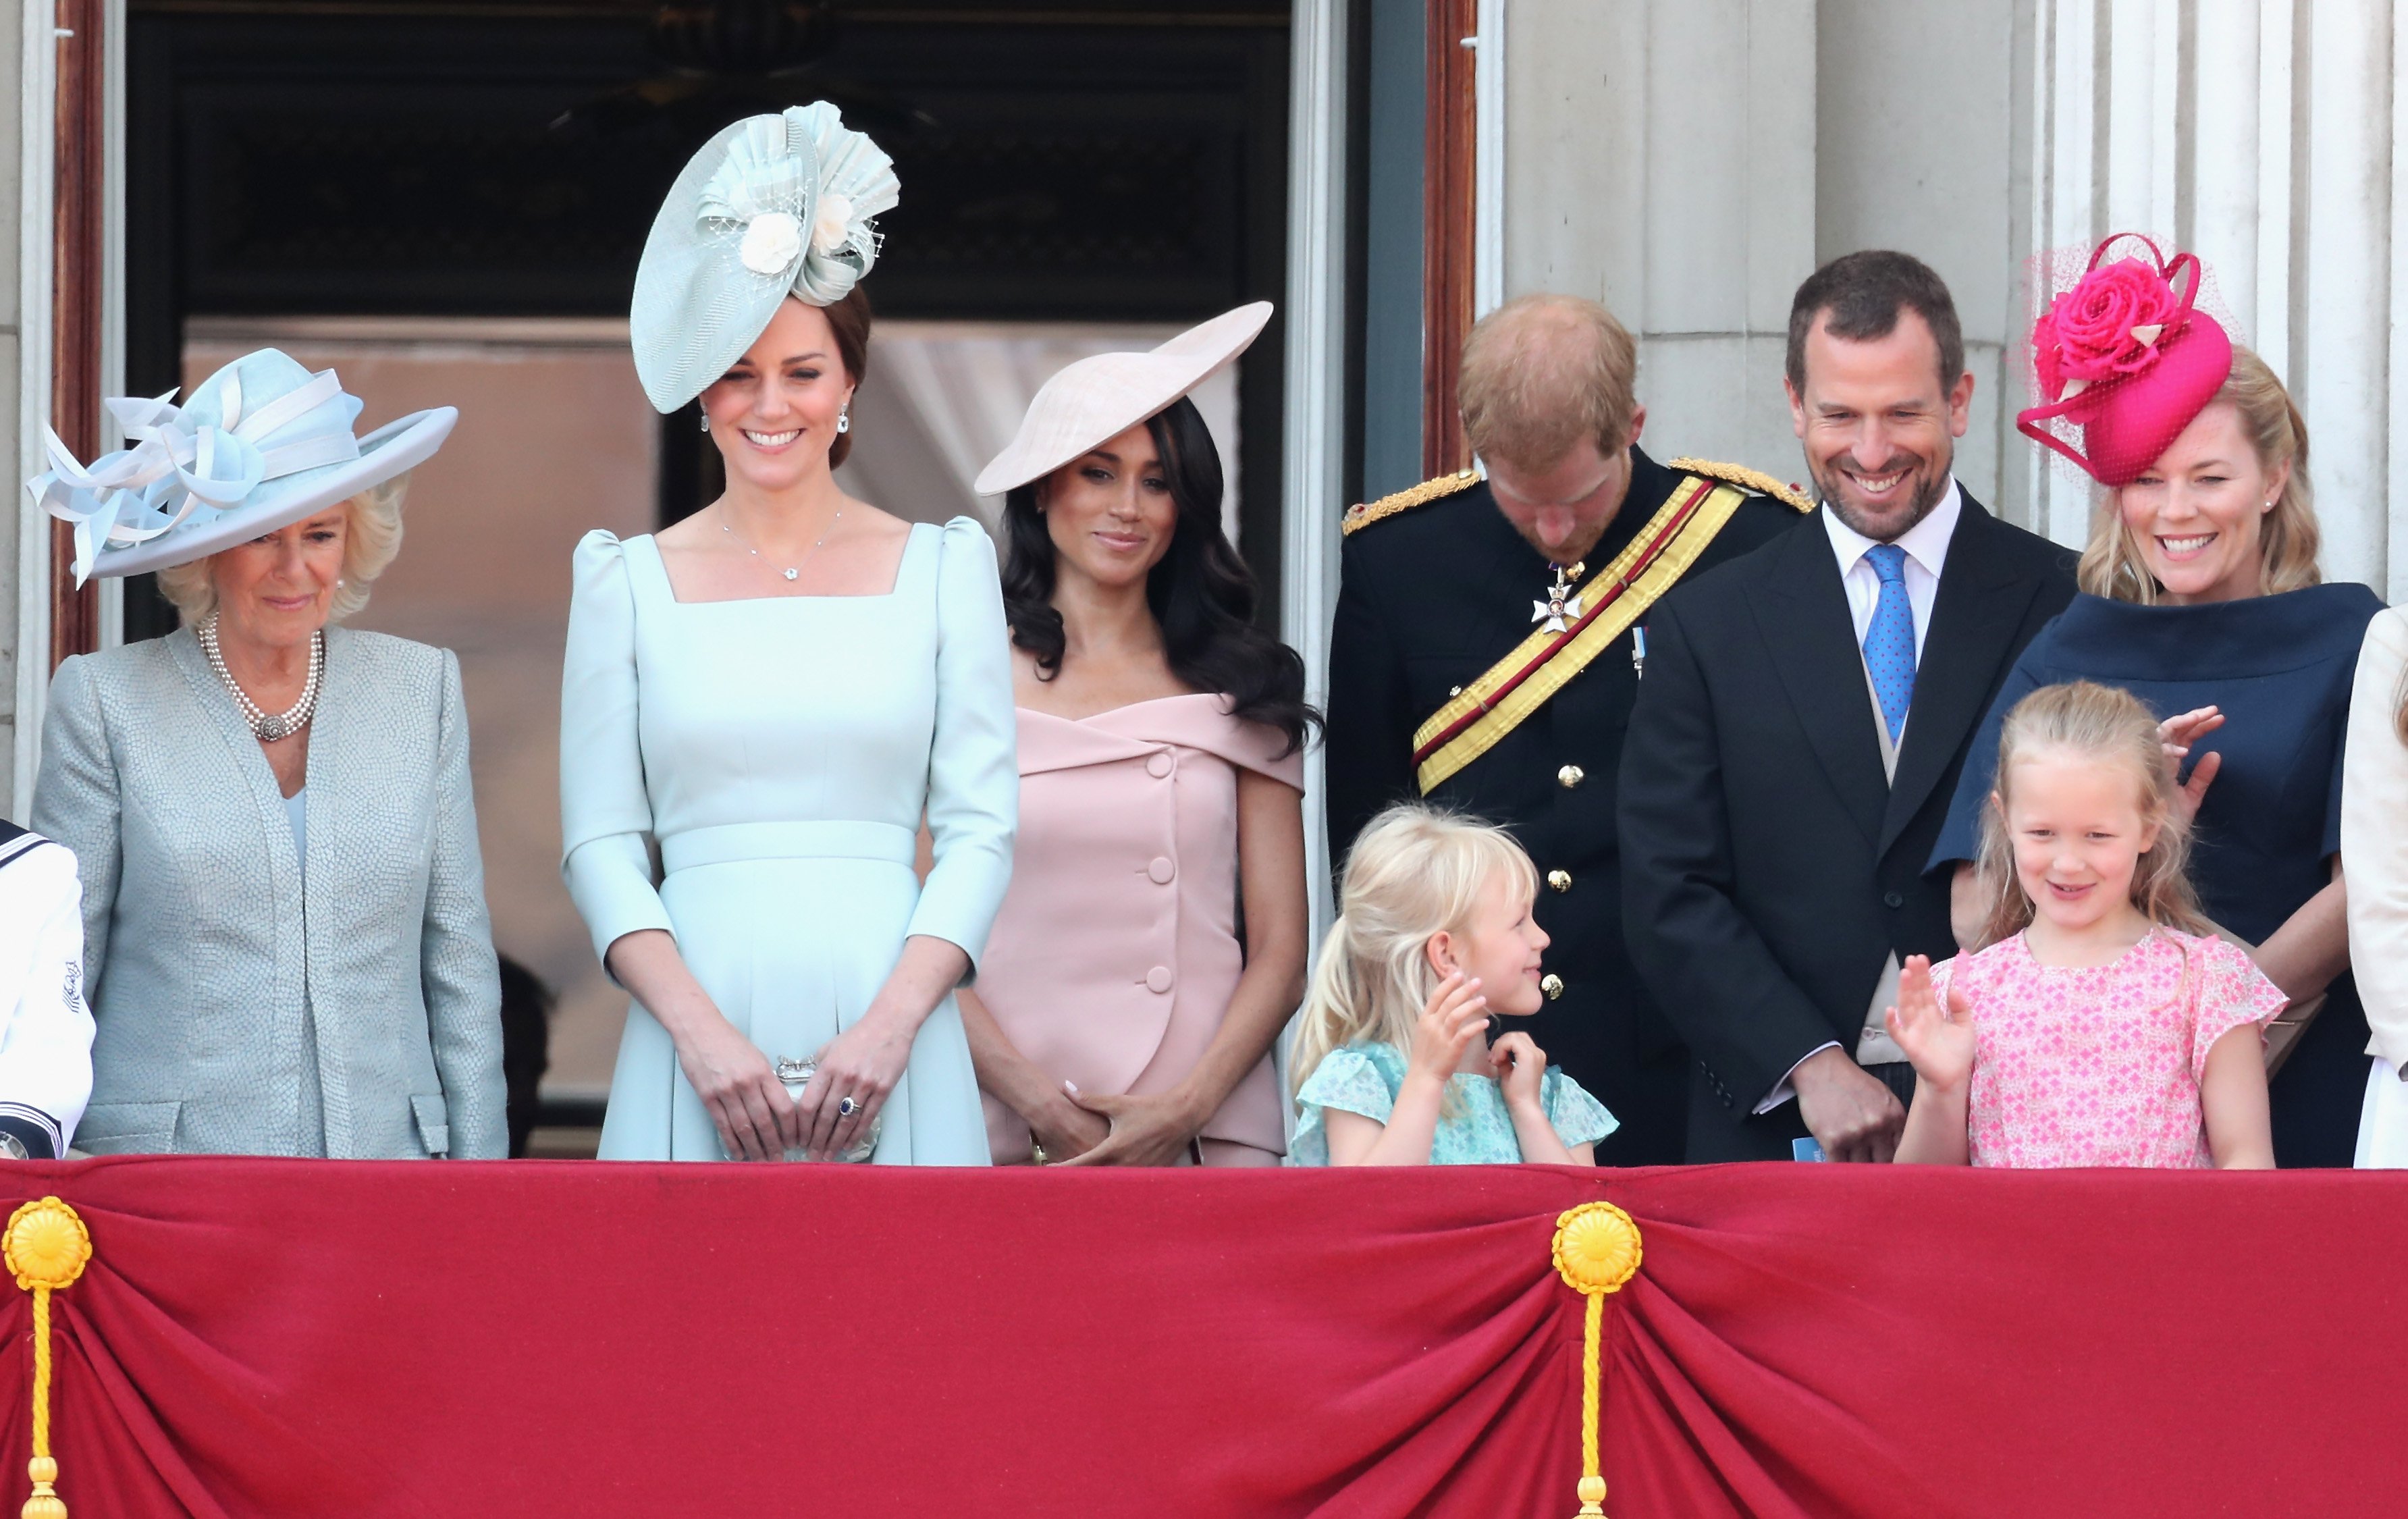 Kate Middleton, Prince William, and other members of the royal family waving to the public from a balcony | Photo: Getty Images